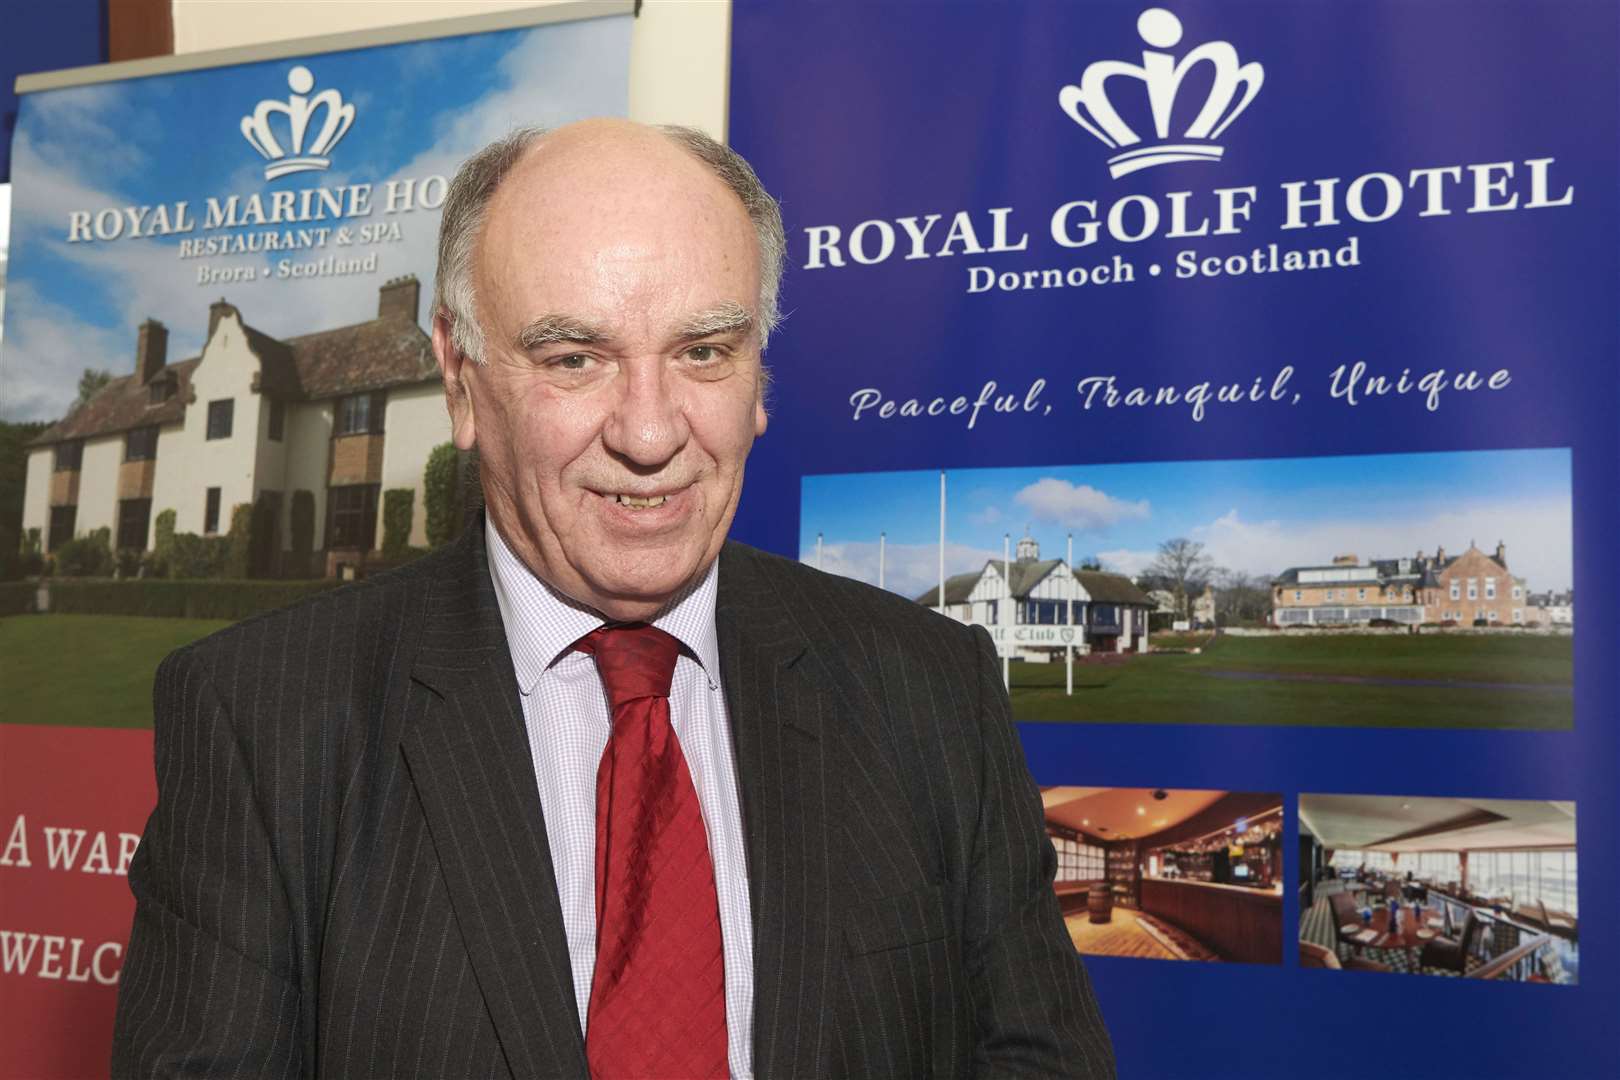 David Sutherland says good growth is projected for the Royal Marine and Royal Golf this year.